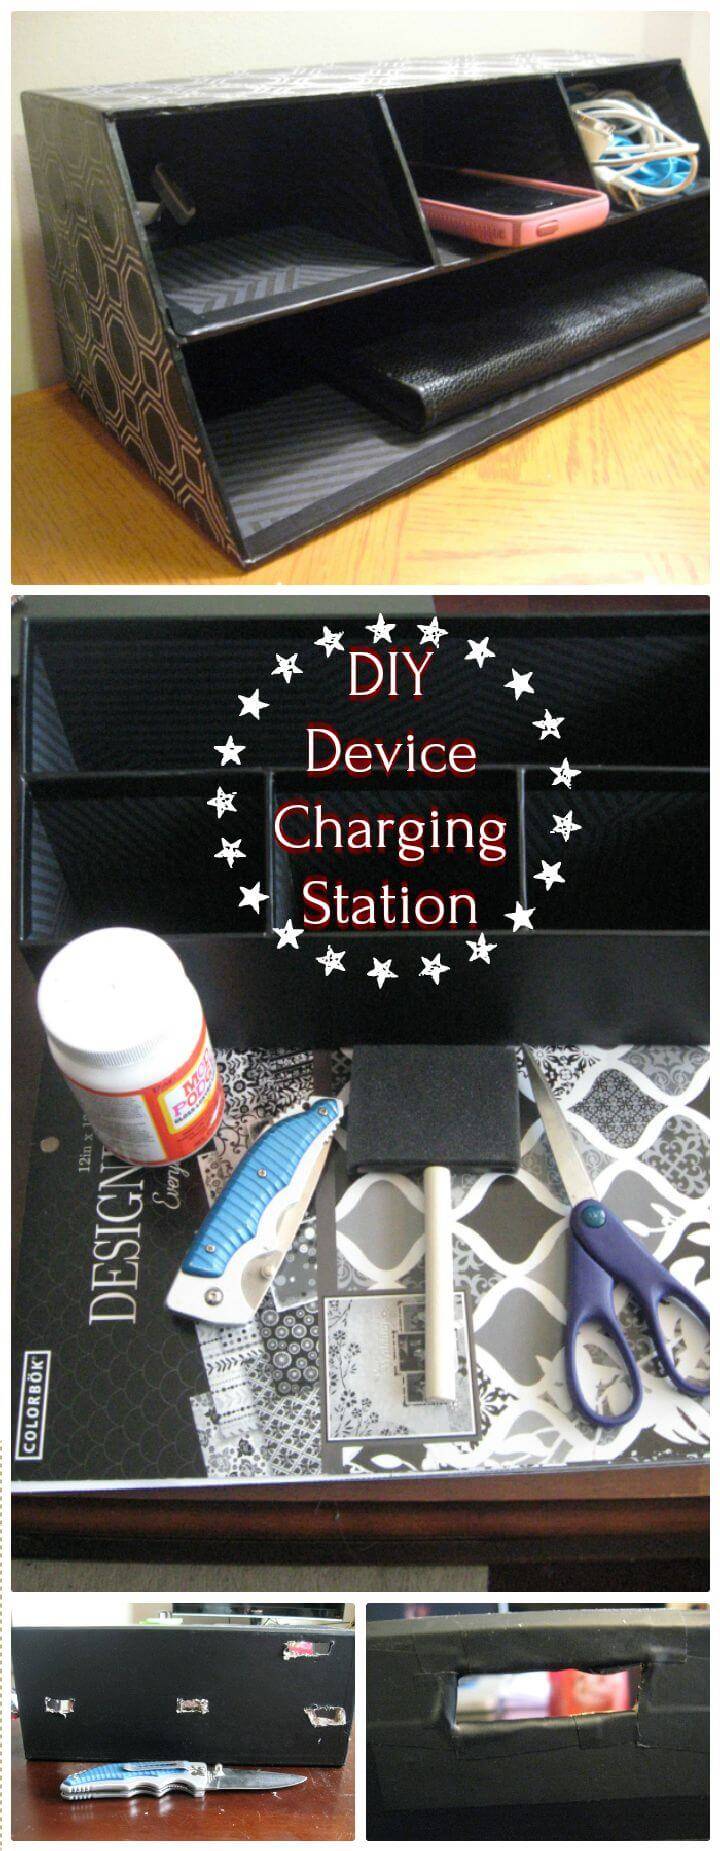 DIY Device Charging Station